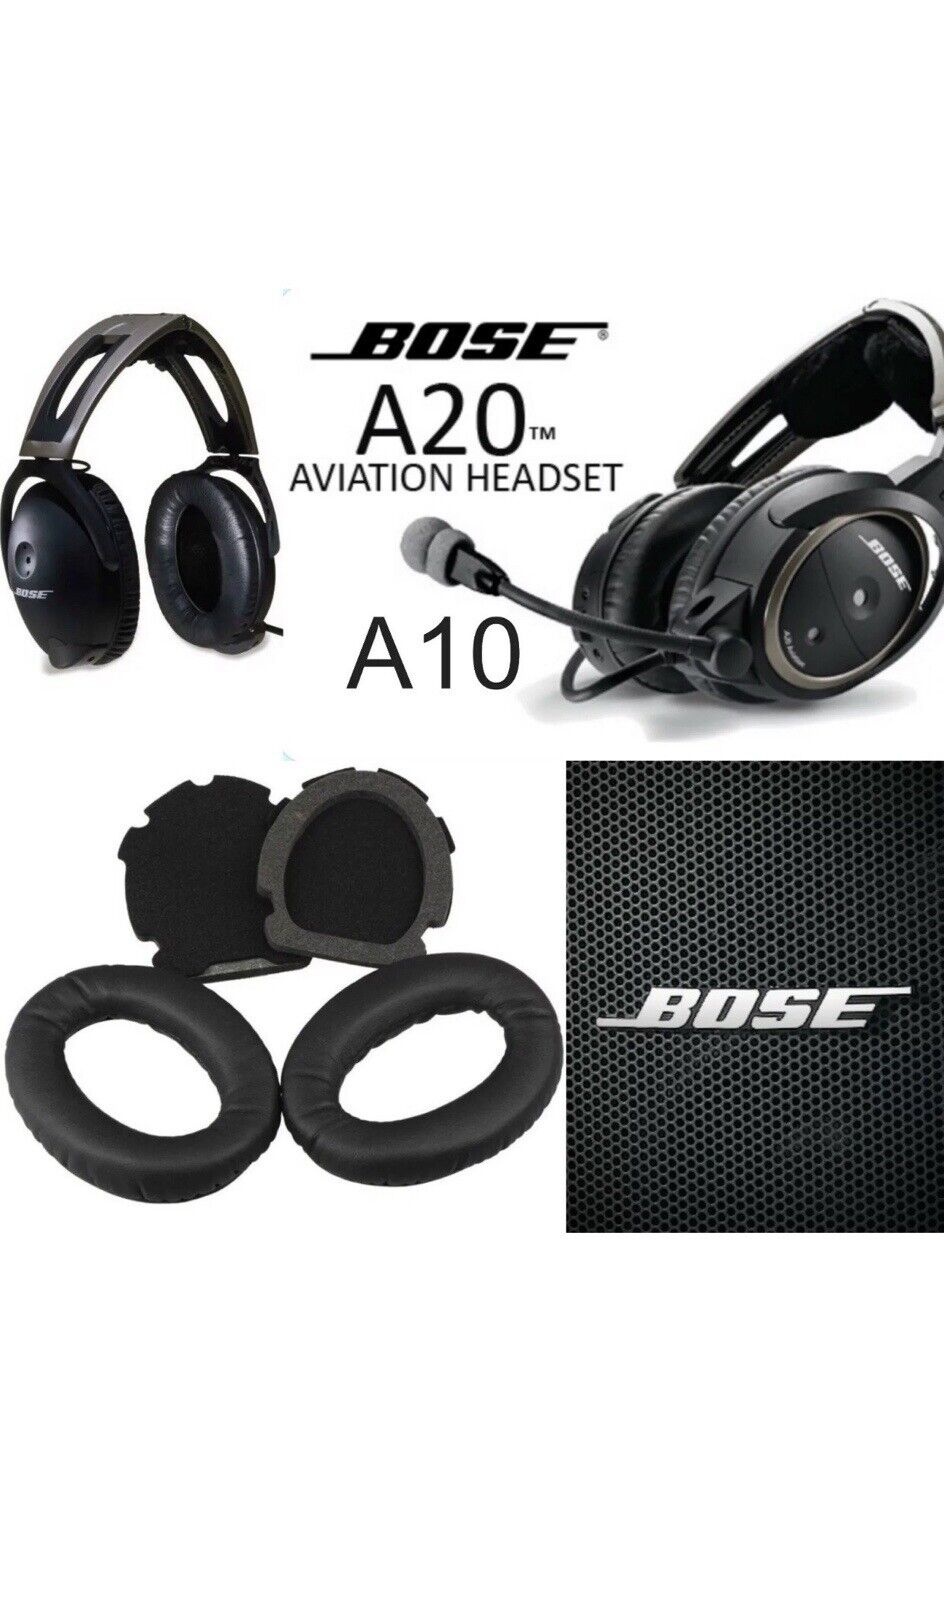 New Replacement Ear Pads Cushions for Aviation Headset X A10 A20 Bose Headphones